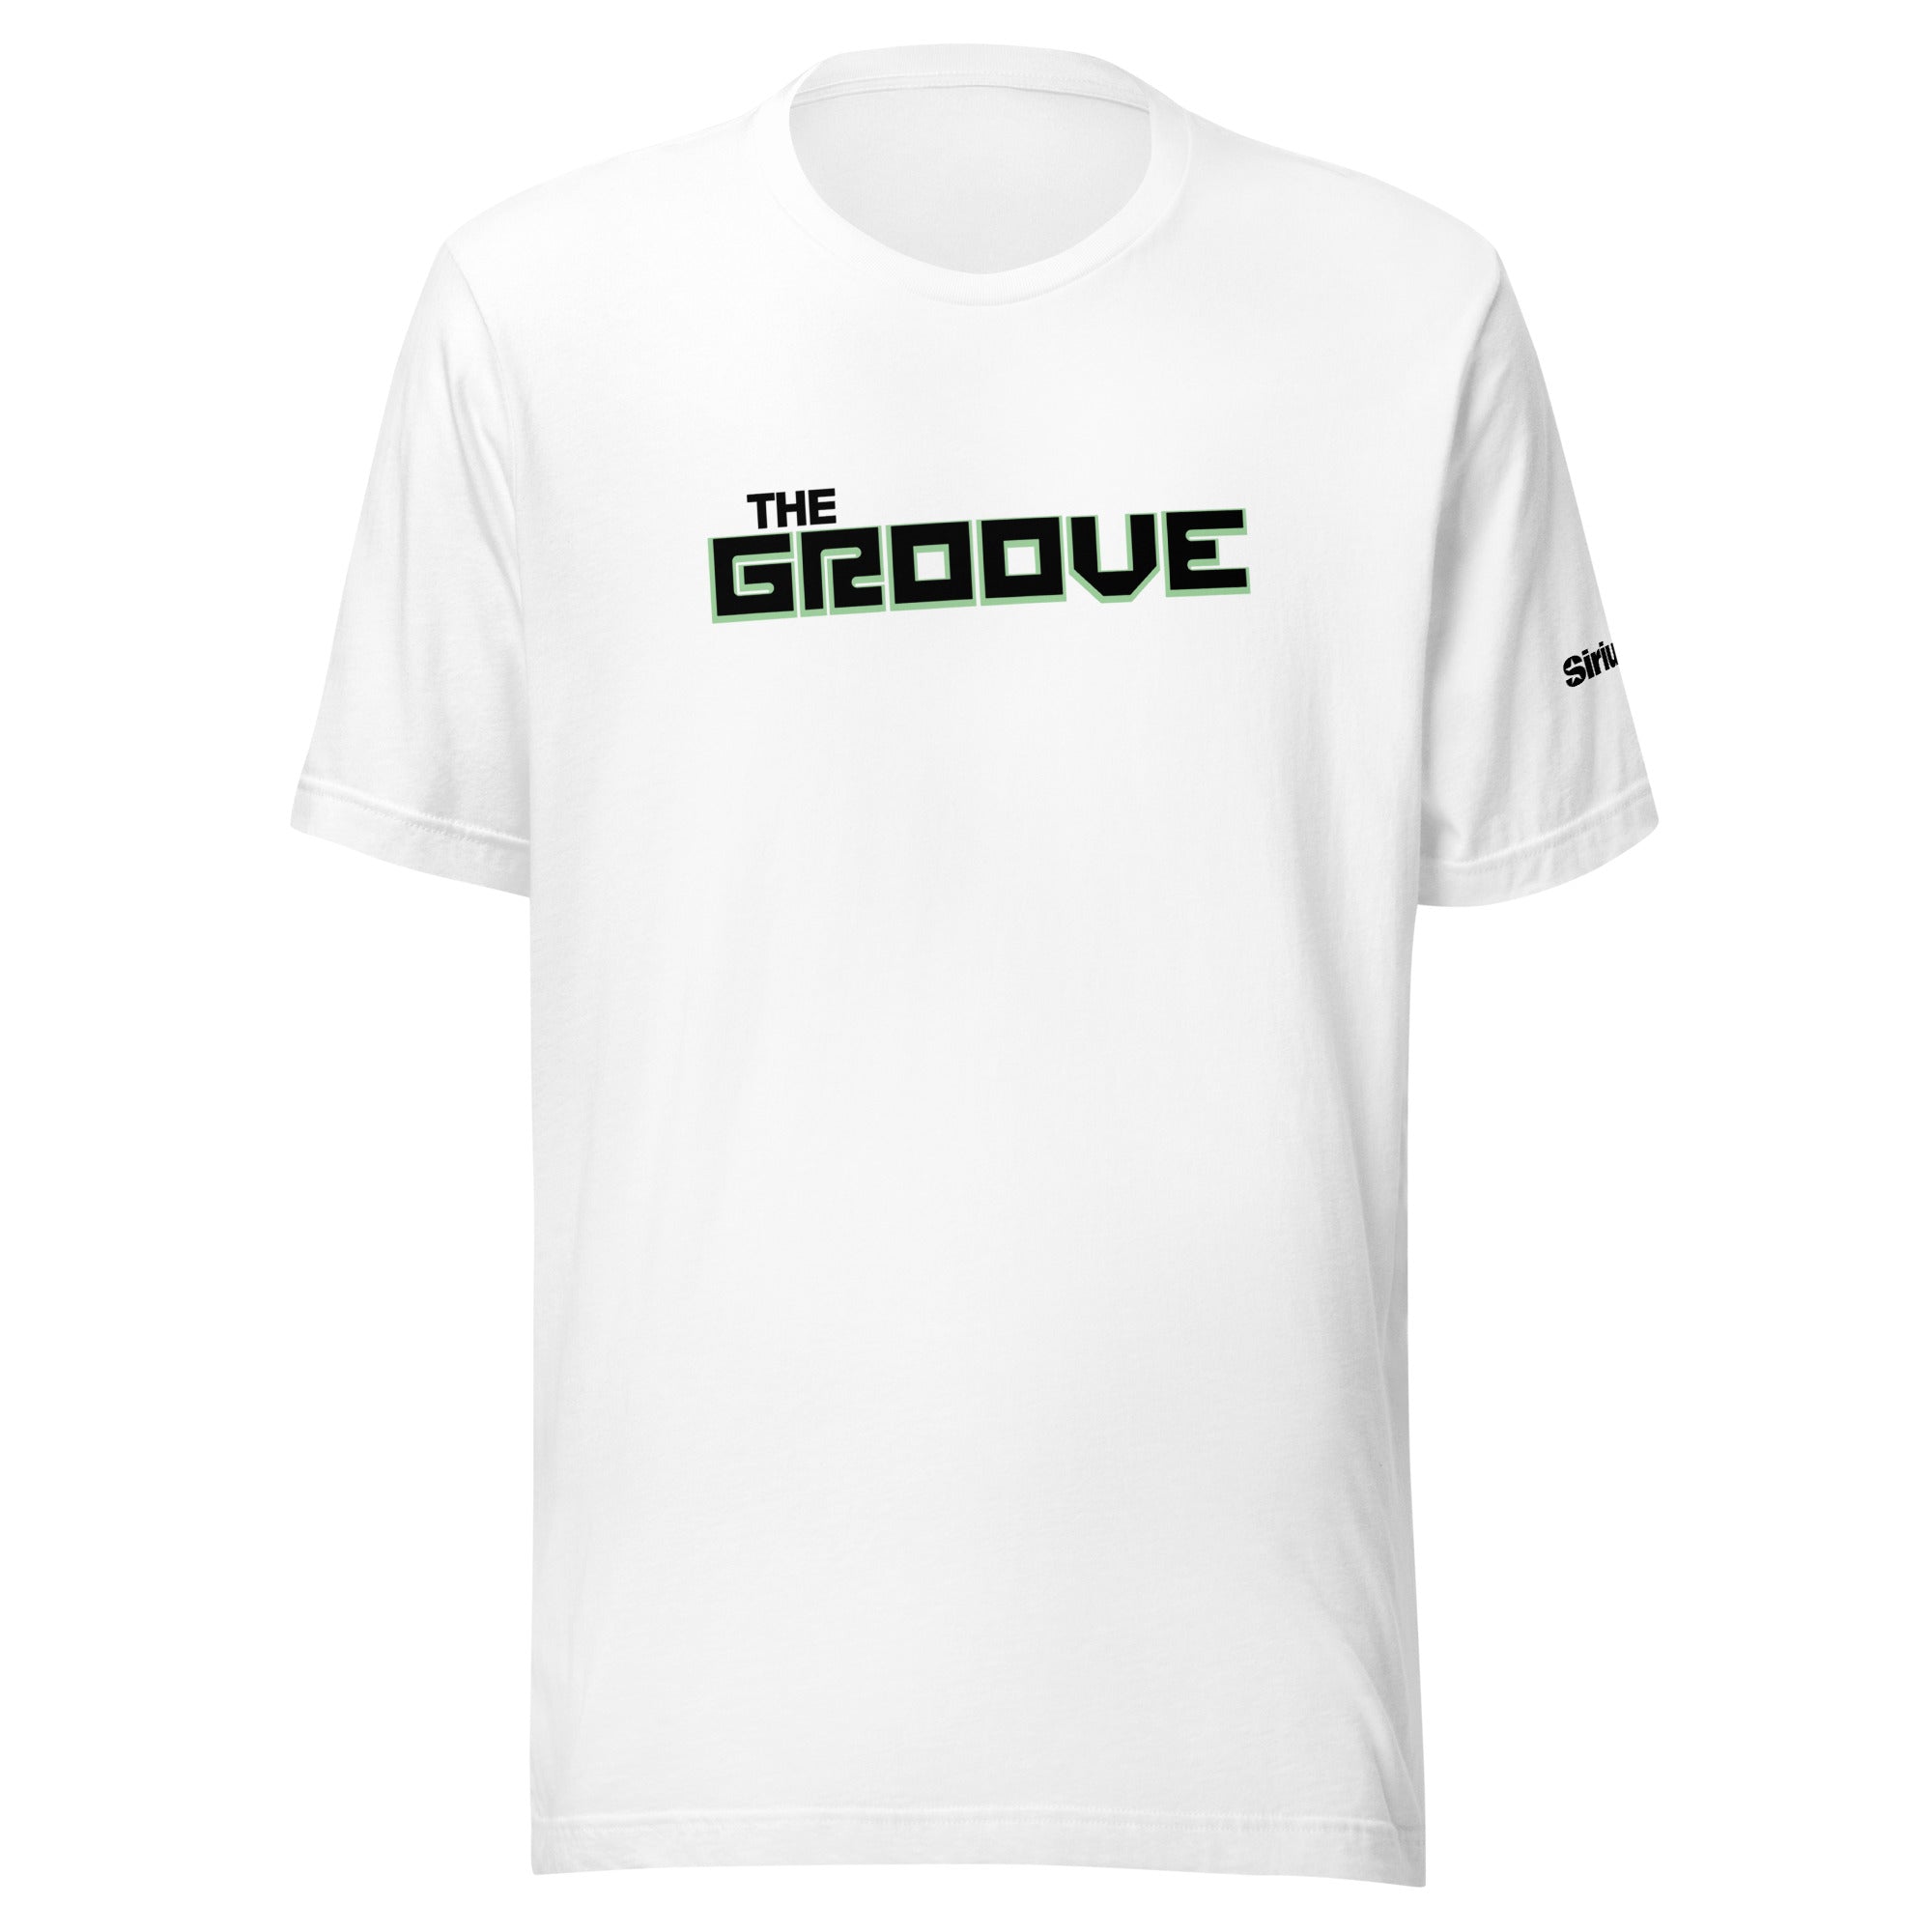 The Groove: T-shirt (White)